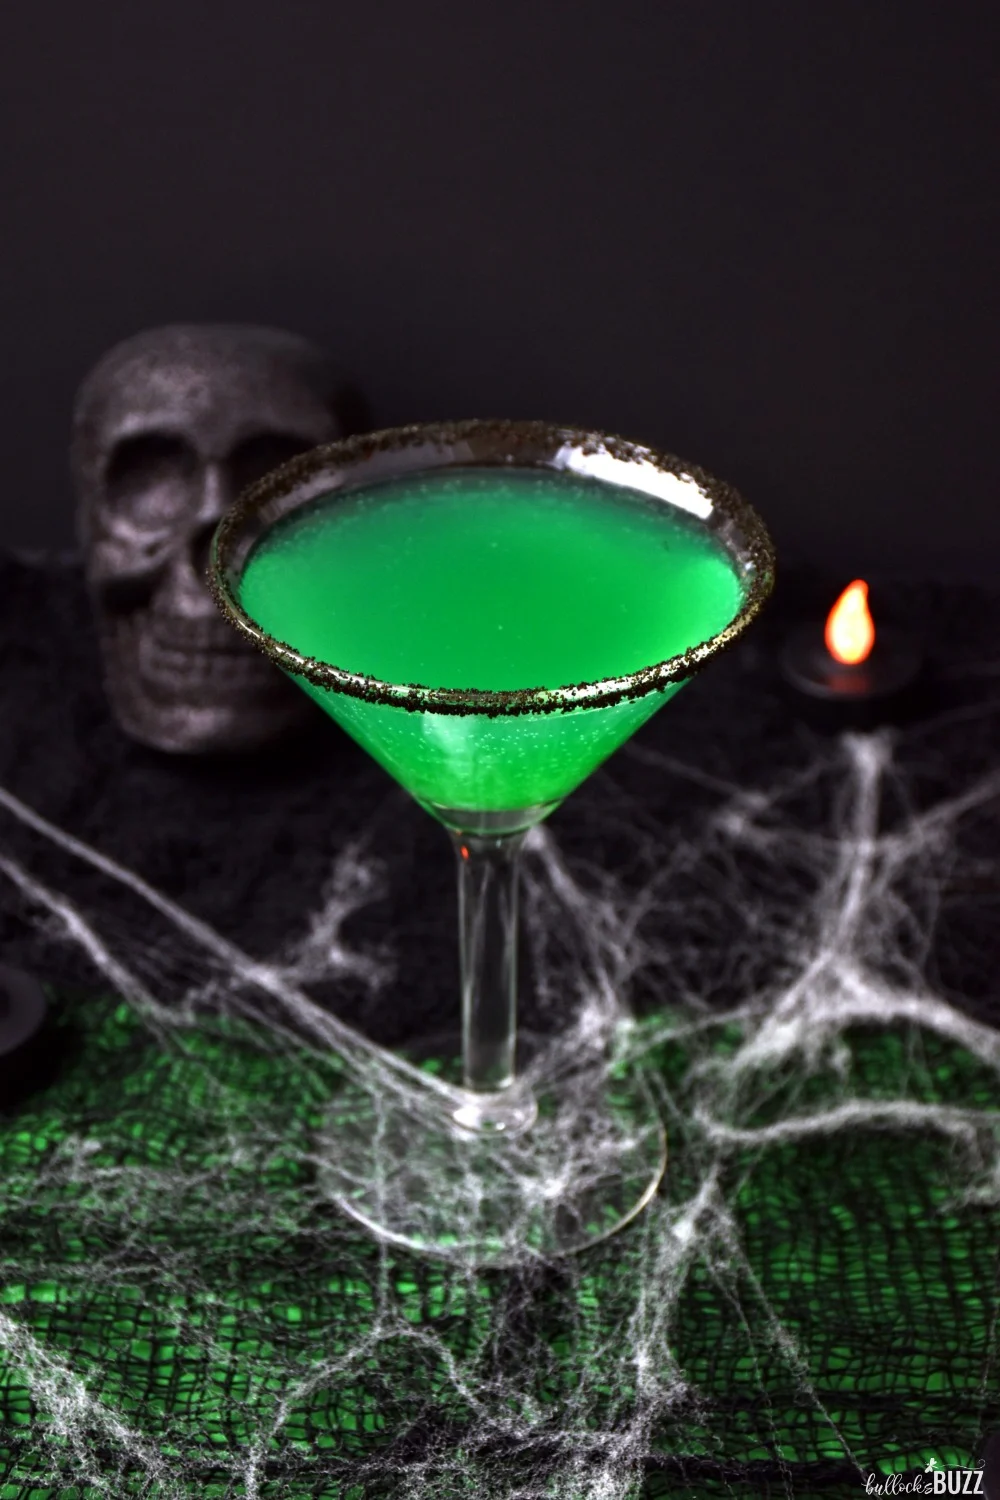 No need to be a pro bartender to take on this boo-zy Halloween cocktail recipe, it's extremely easy to make and best of all, even easier to drink. That's what makes this Green Goblin Halloween Cocktail so dreadfullly delicious!